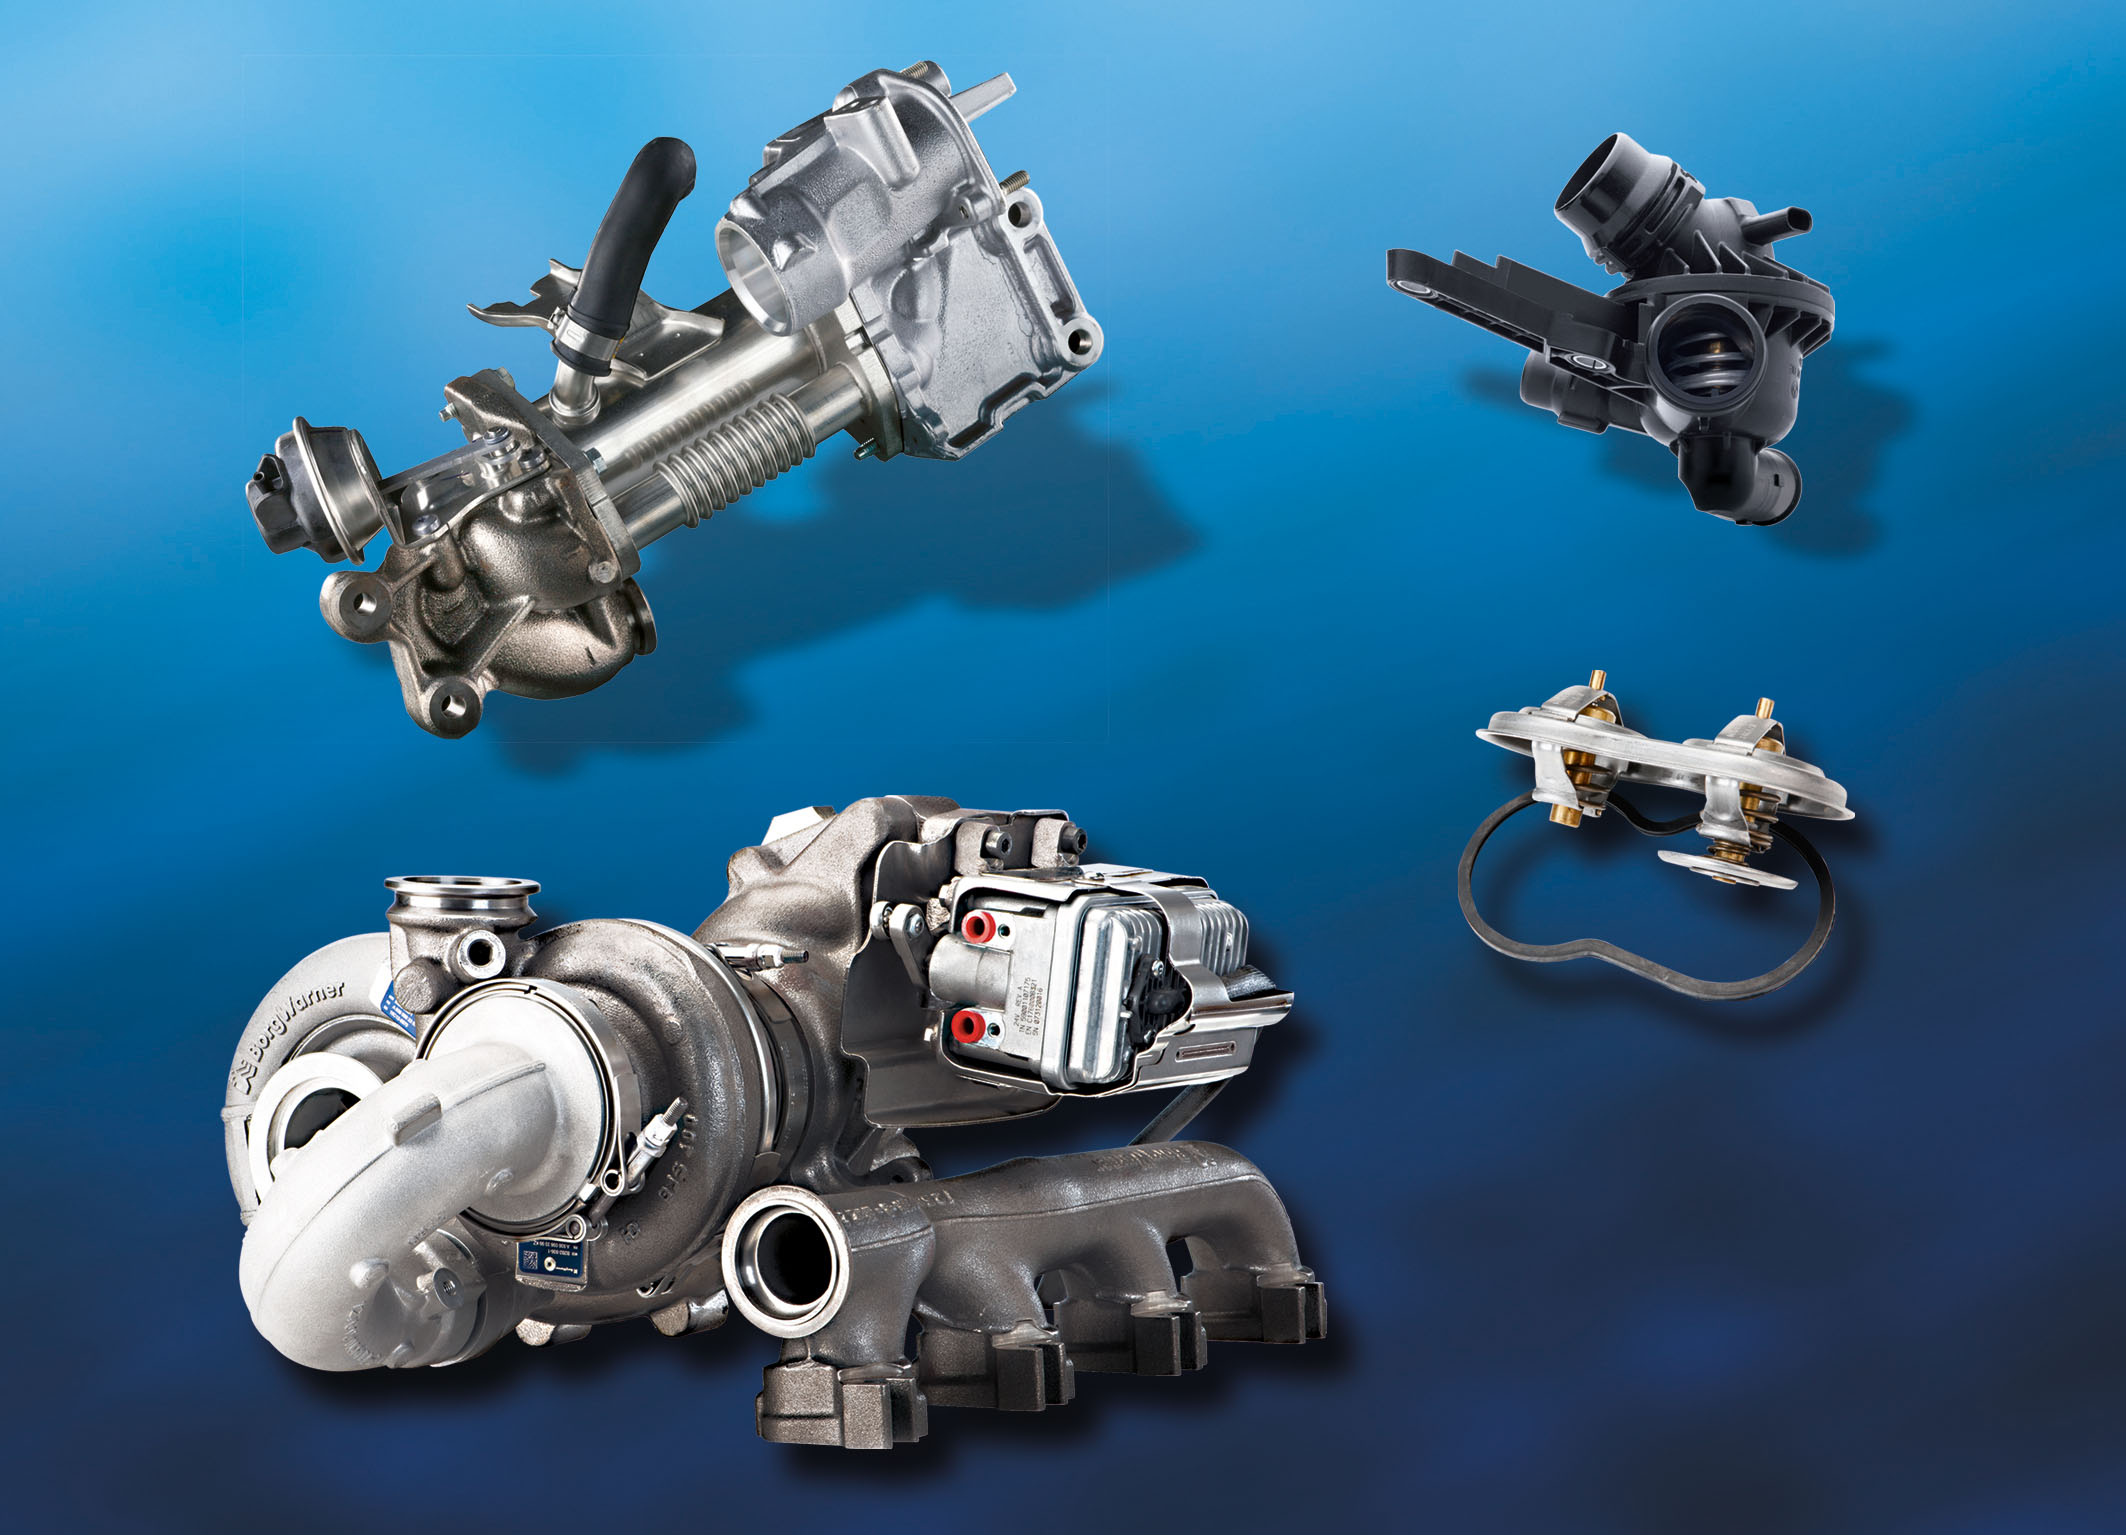 BorgWarner expands its European aftermarket product portfolio with emissions products in addition to turbochargers.